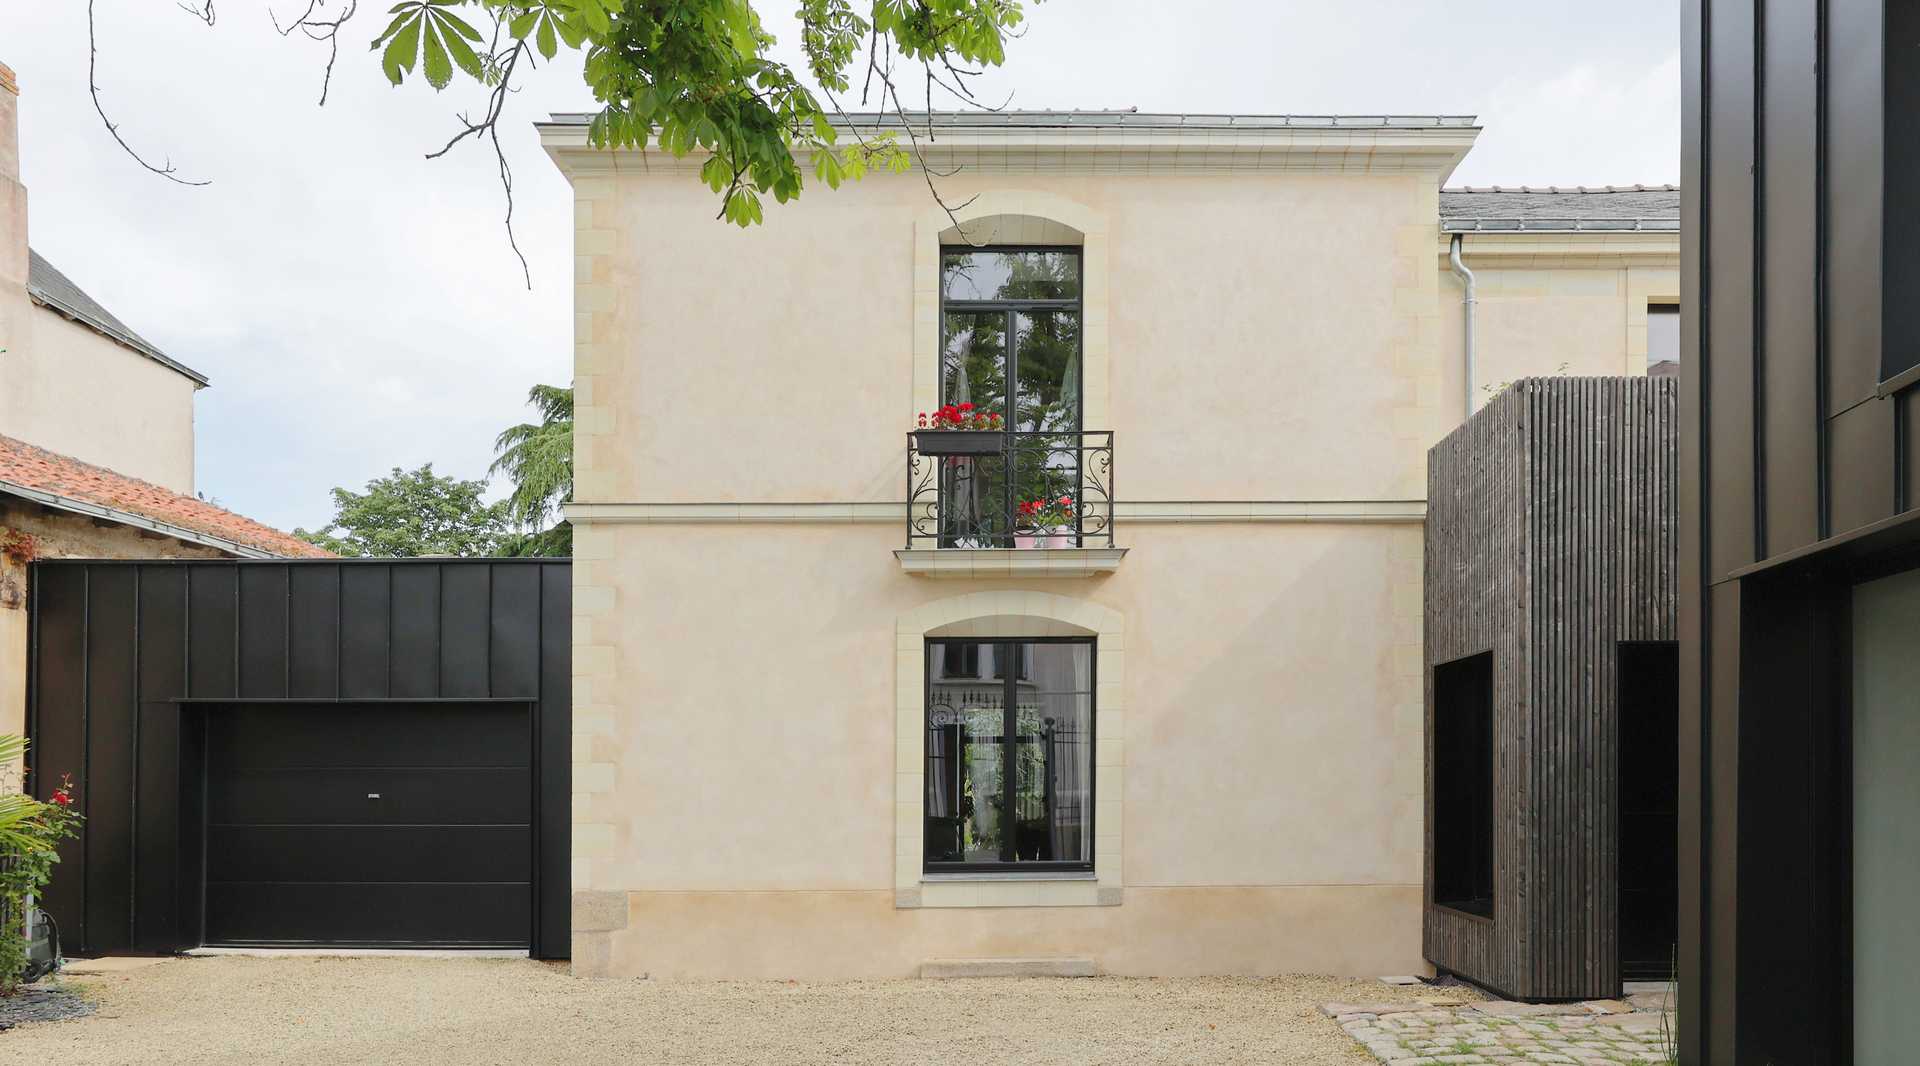 Extension of a town house made by an architect in Tours